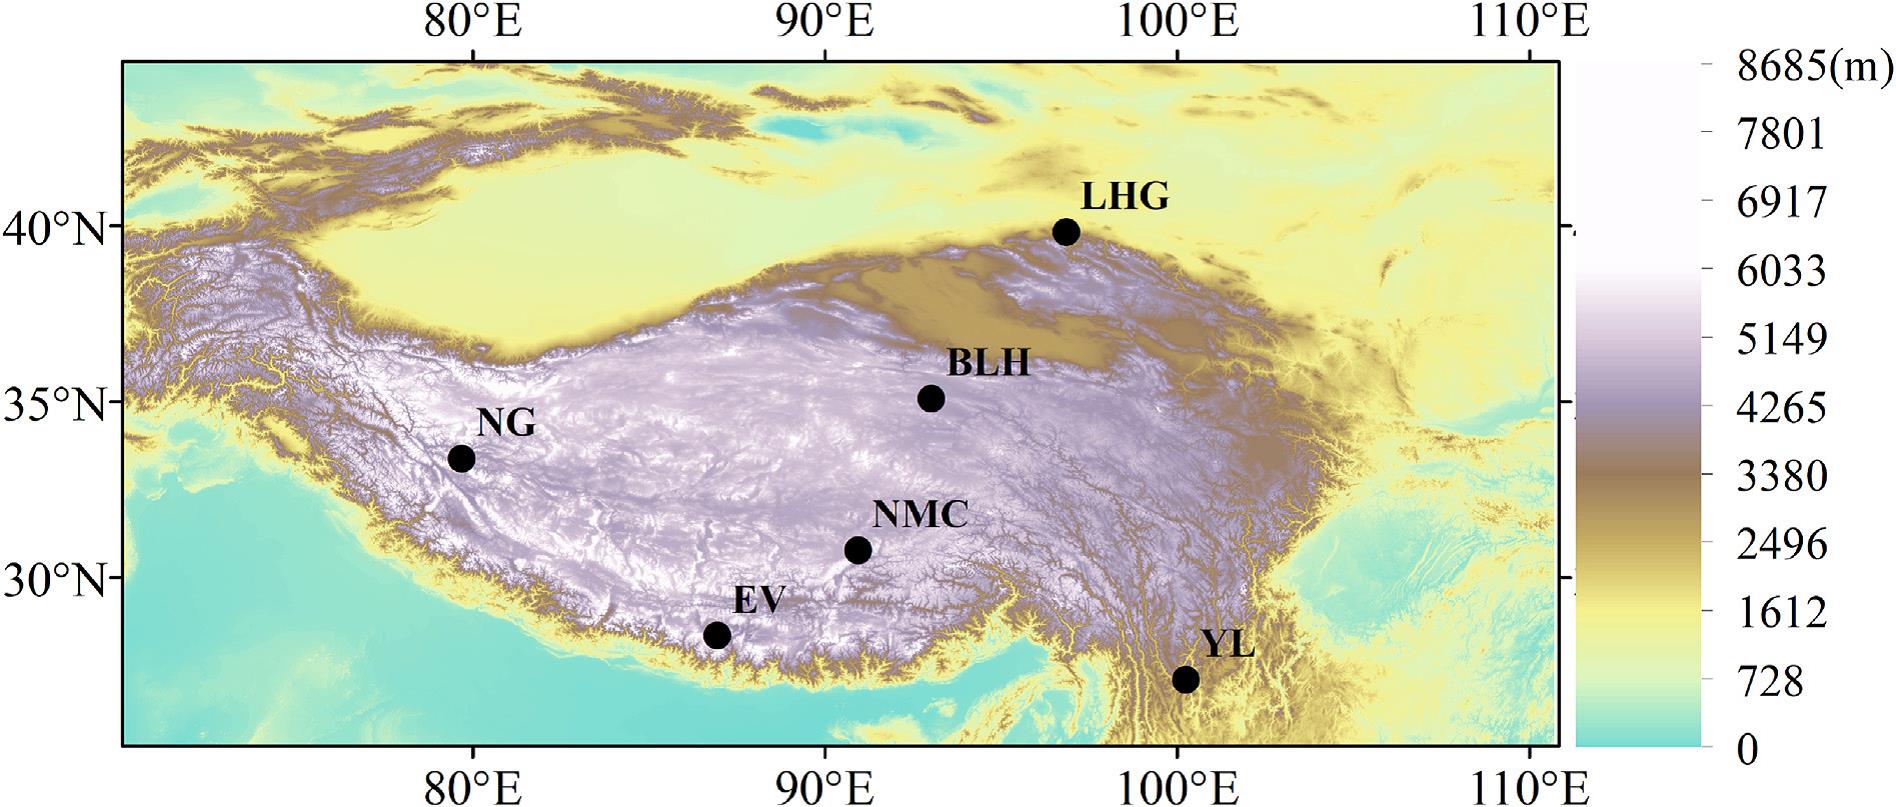 Scientists Reveal Sources and Distribution of Polycyclic Aromatic Hydrocarbons over the Tibetan Plateau